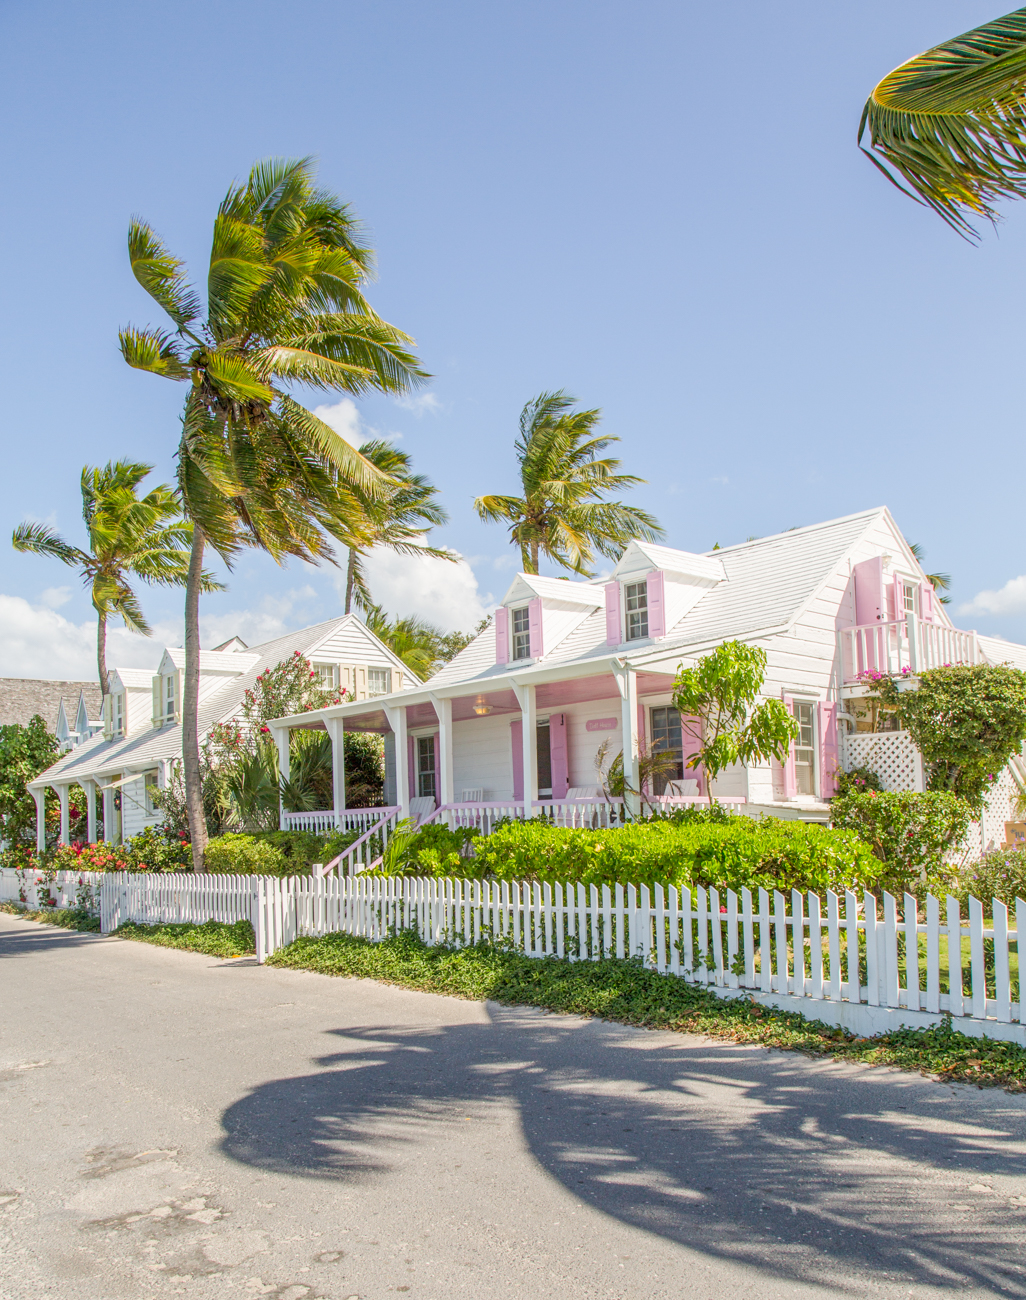 Travel: Guide to Harbour Island by Palm Beach Lately